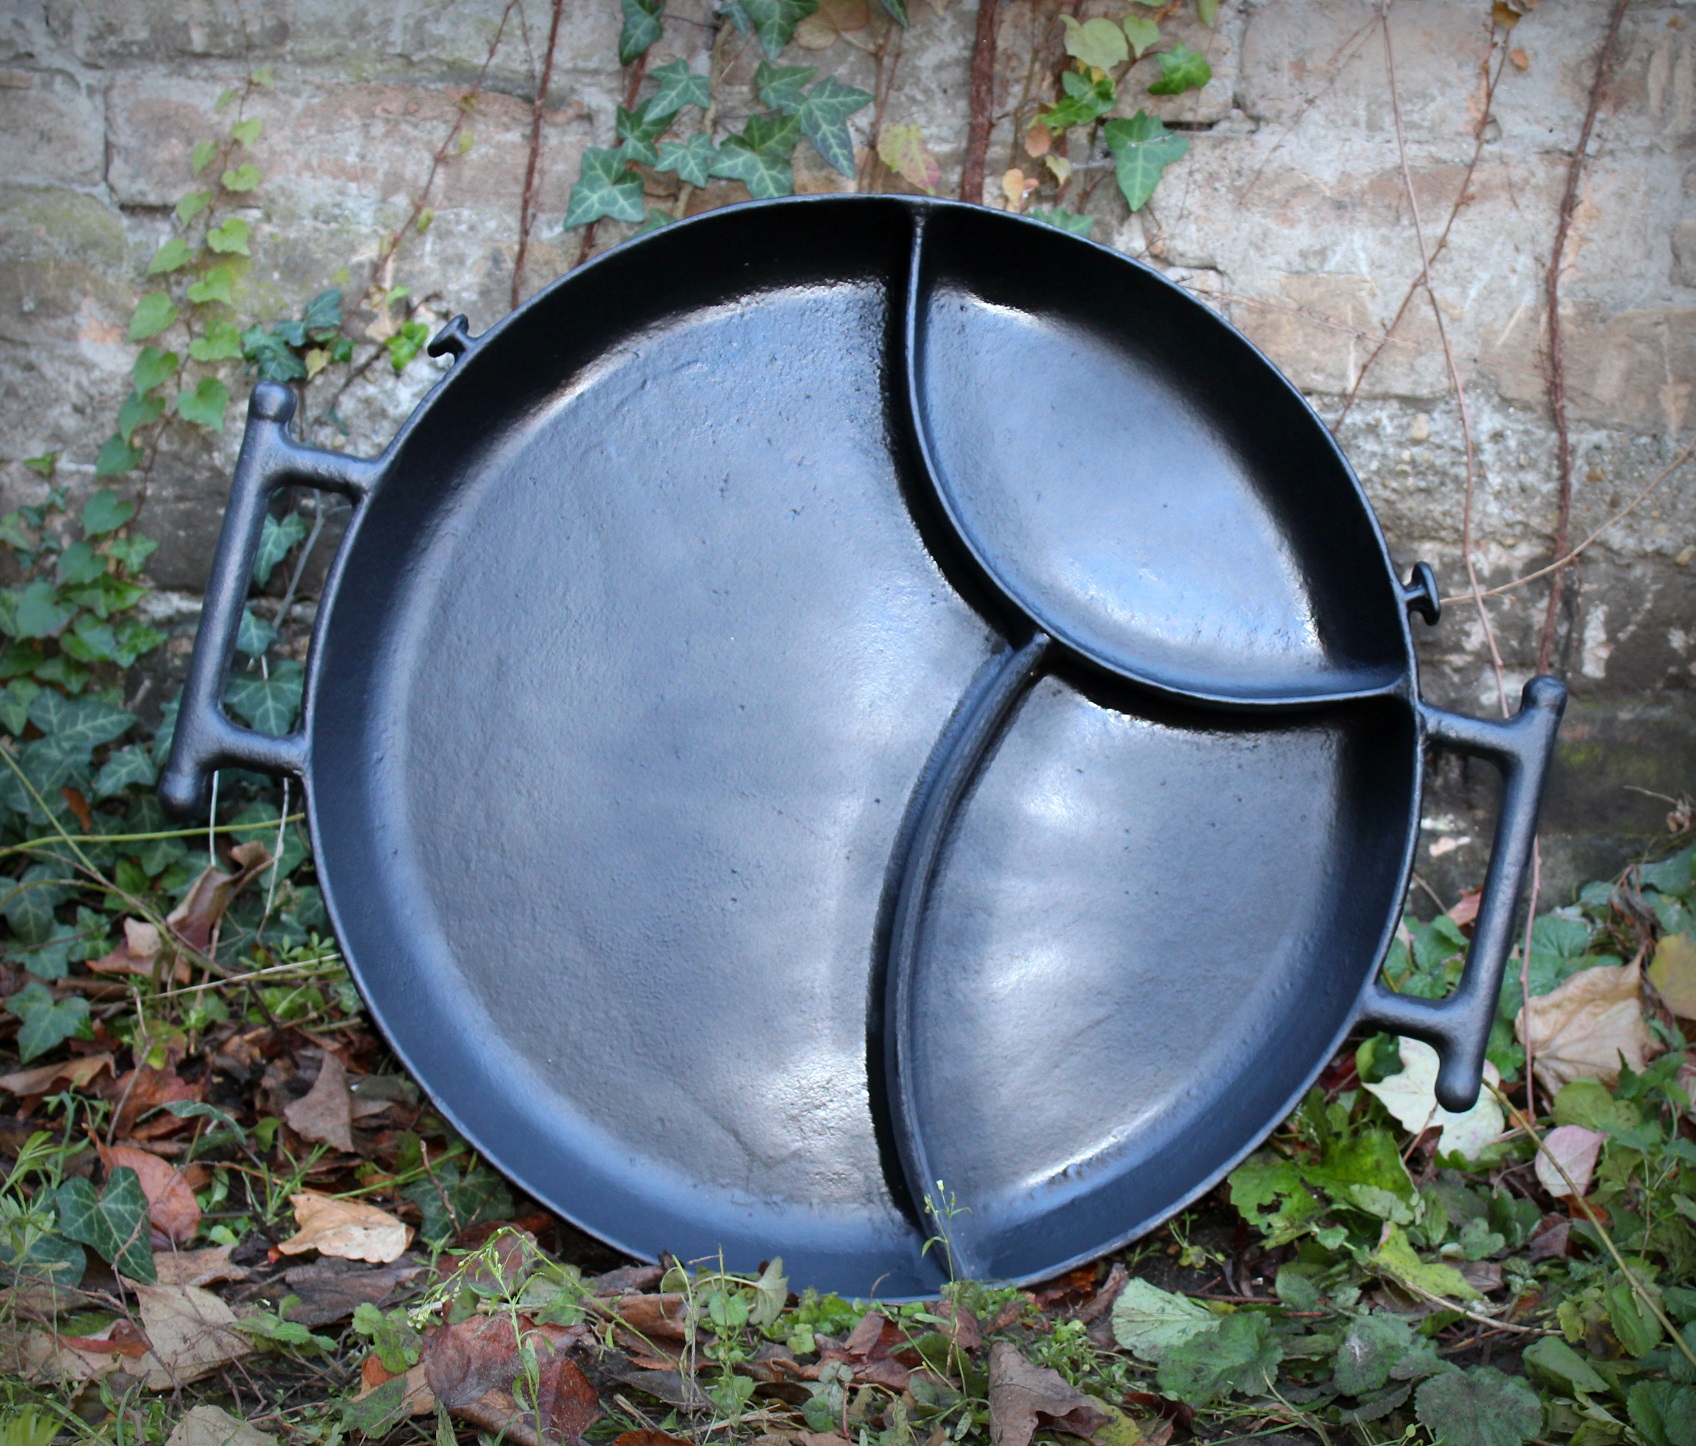 Cast iron divided pan 560 mm